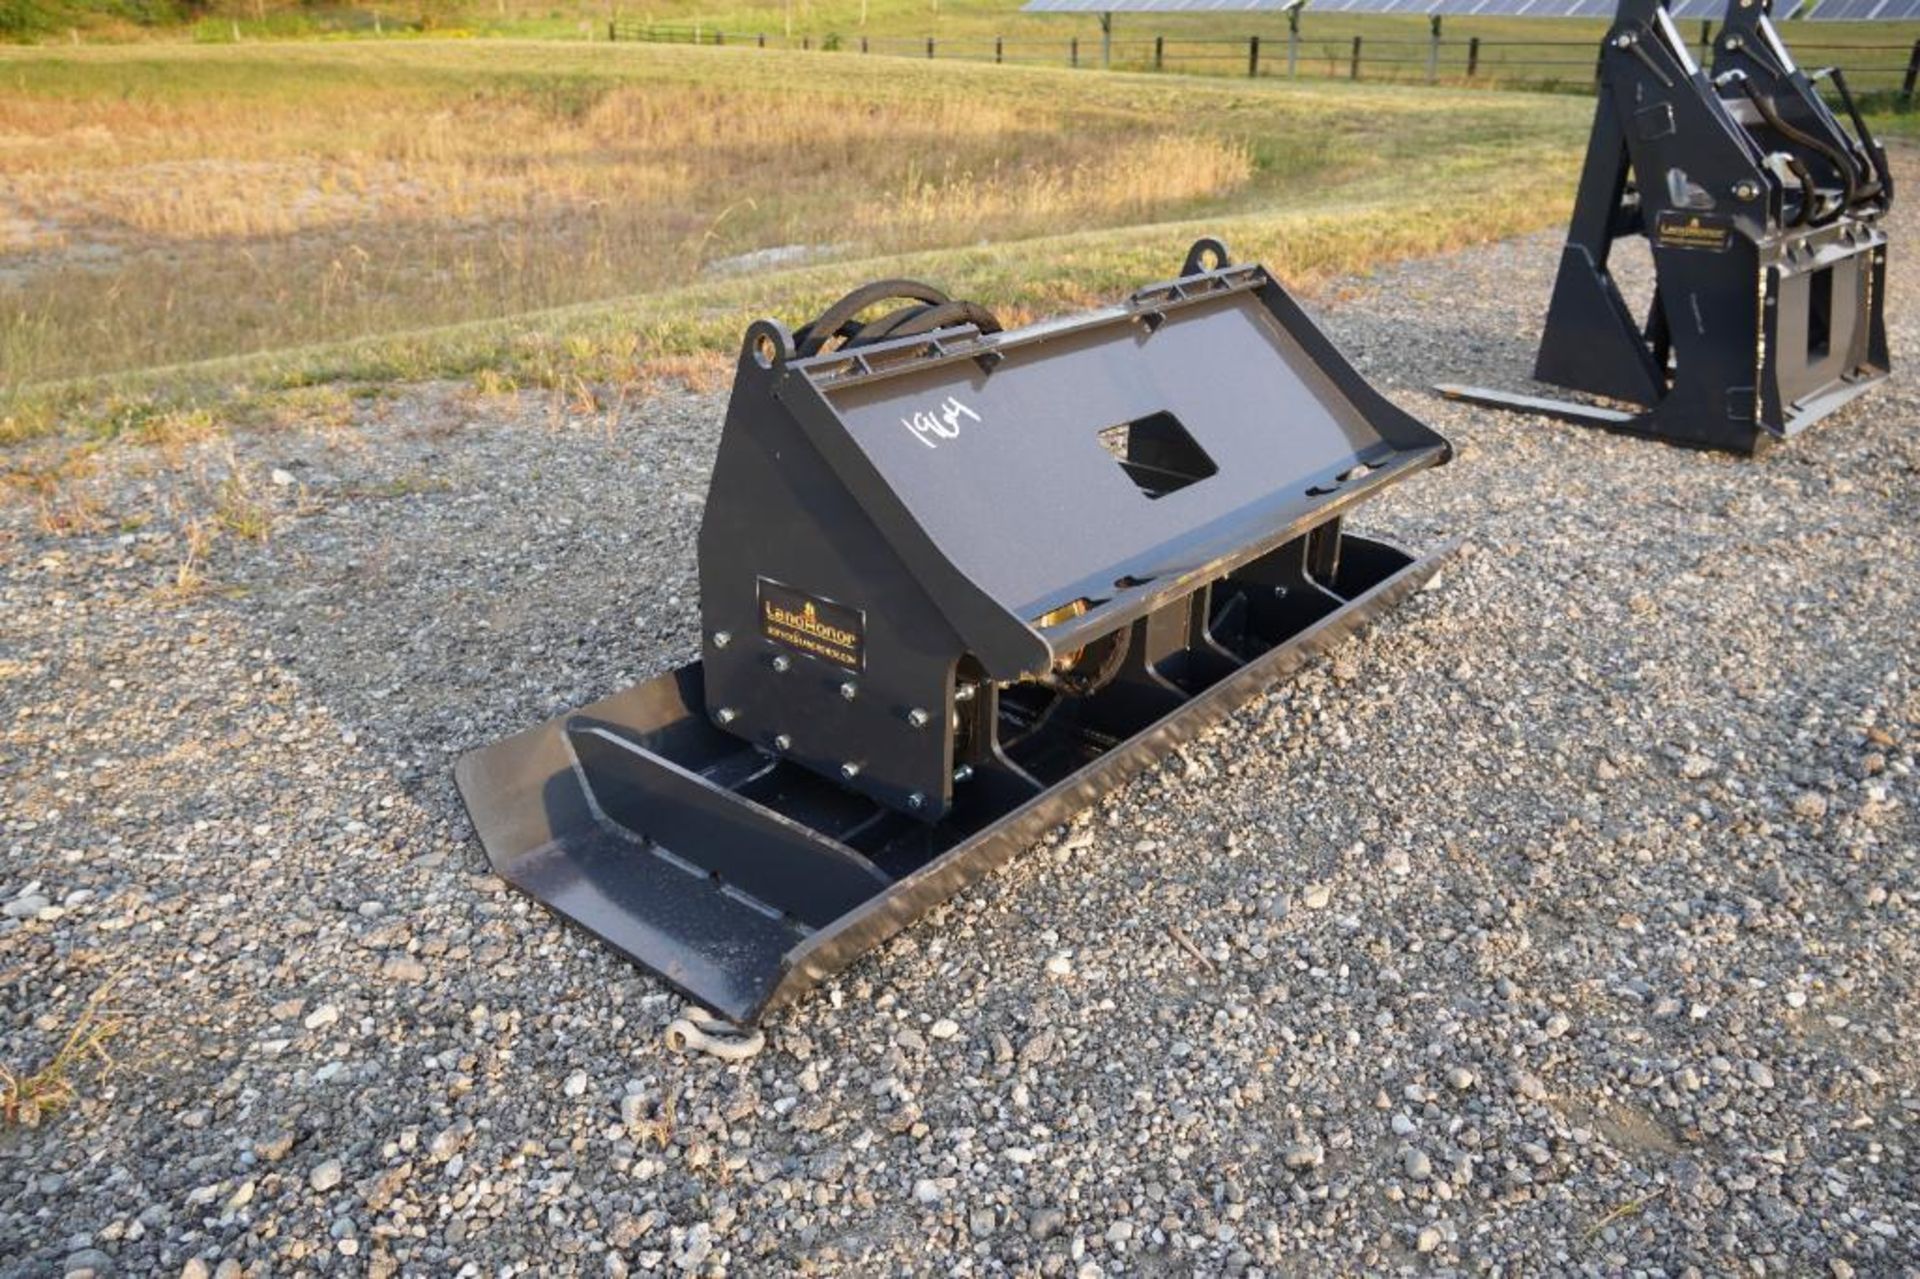 New Landhonor Skid Steer Vibratory Plate Compactor - Image 4 of 5